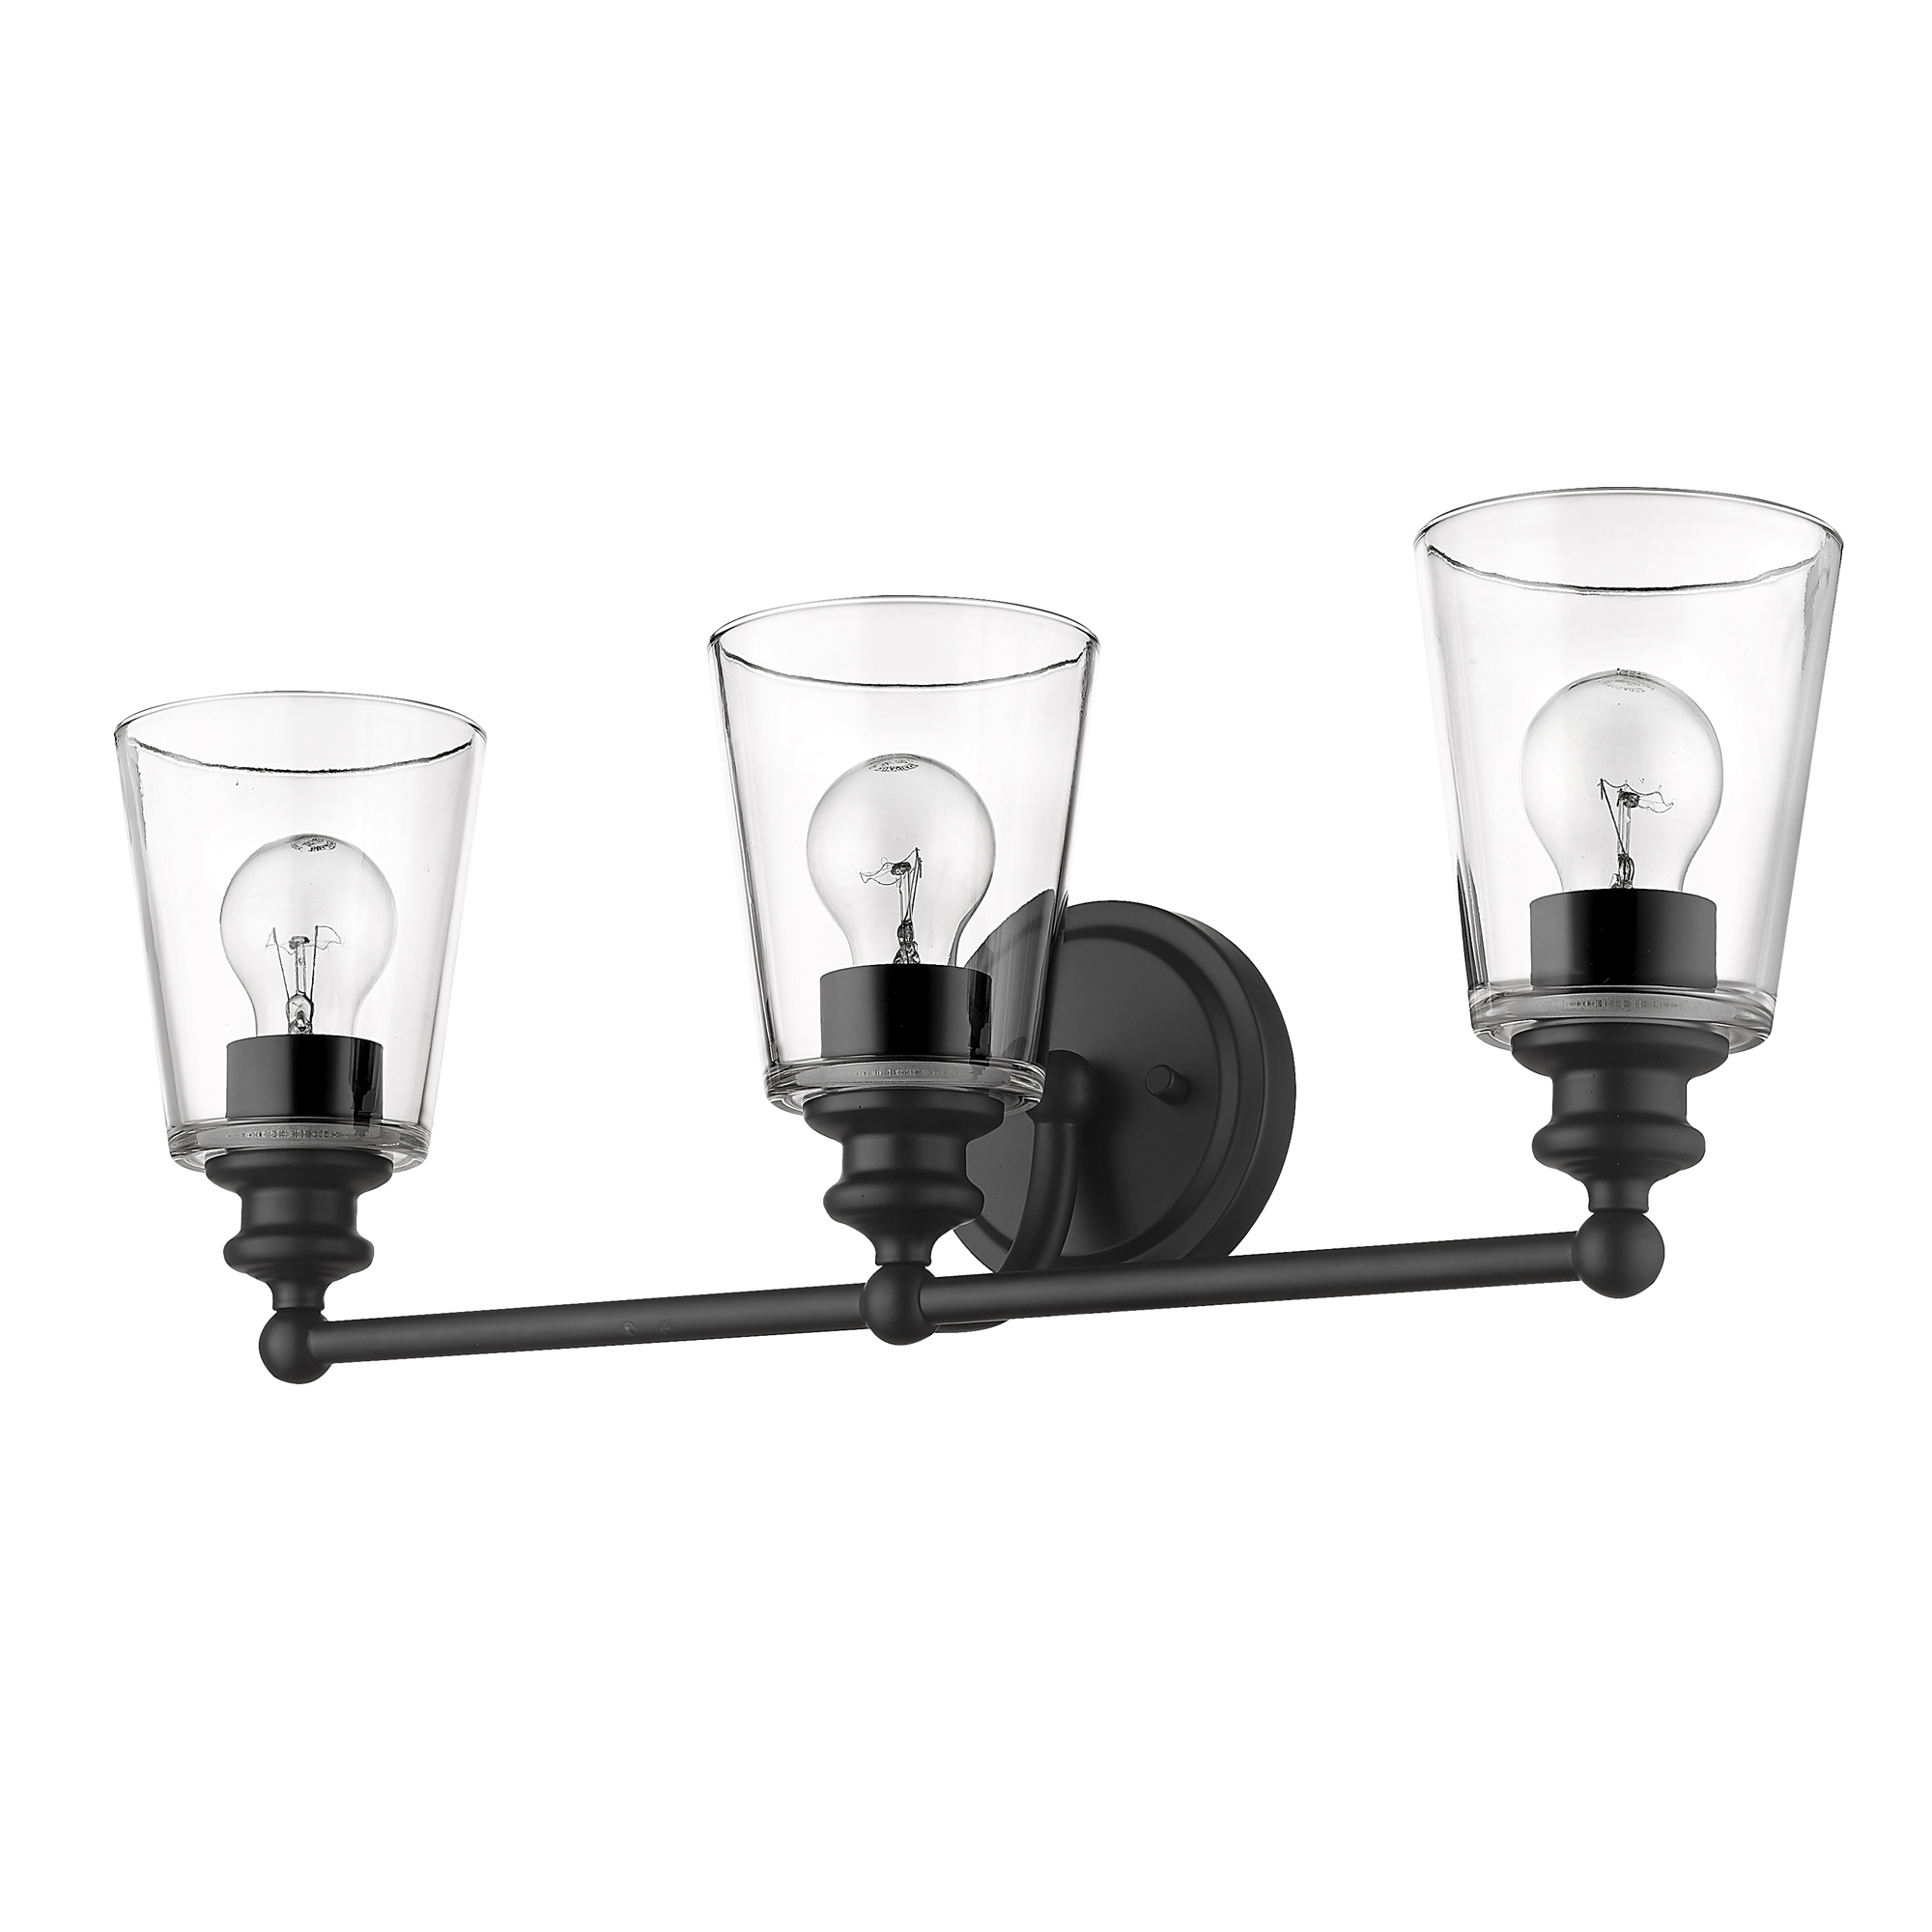 Acclaim Lighting-IN41402BK-Ceil 3-Light Vanity - 15.75 Inches Wide by 8.25 Inches High   Matte Black Finish